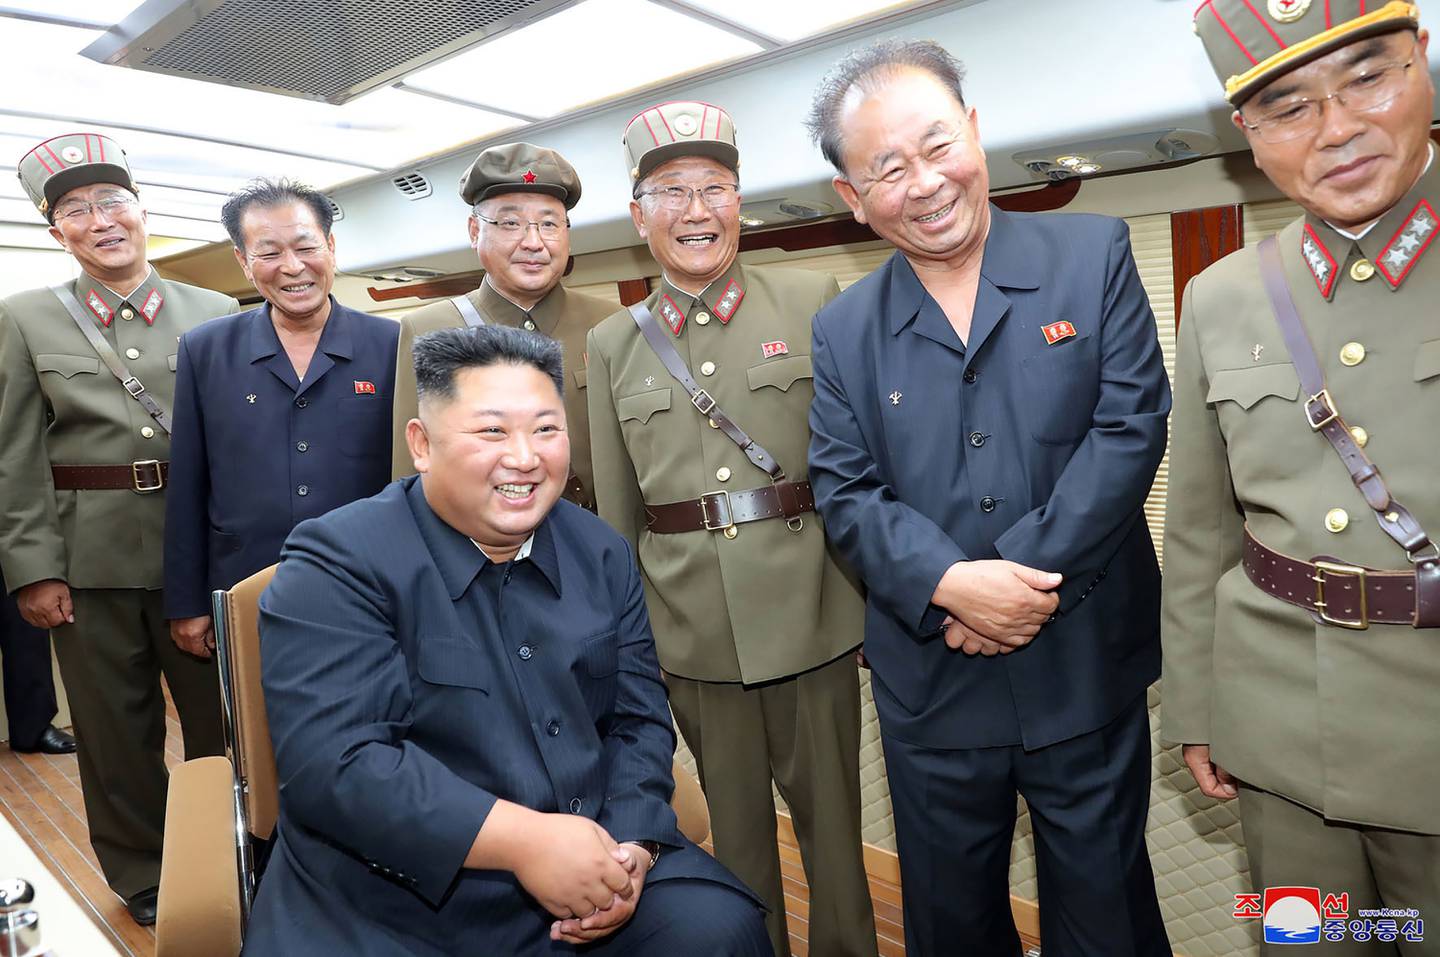 In this Saturday, Aug. 10, 2019, photo provided by the North Korean government, North Korean leader Kim Jong Un, sitting, watches test firings of short-range weapons at an undisclosed location in North Korea.